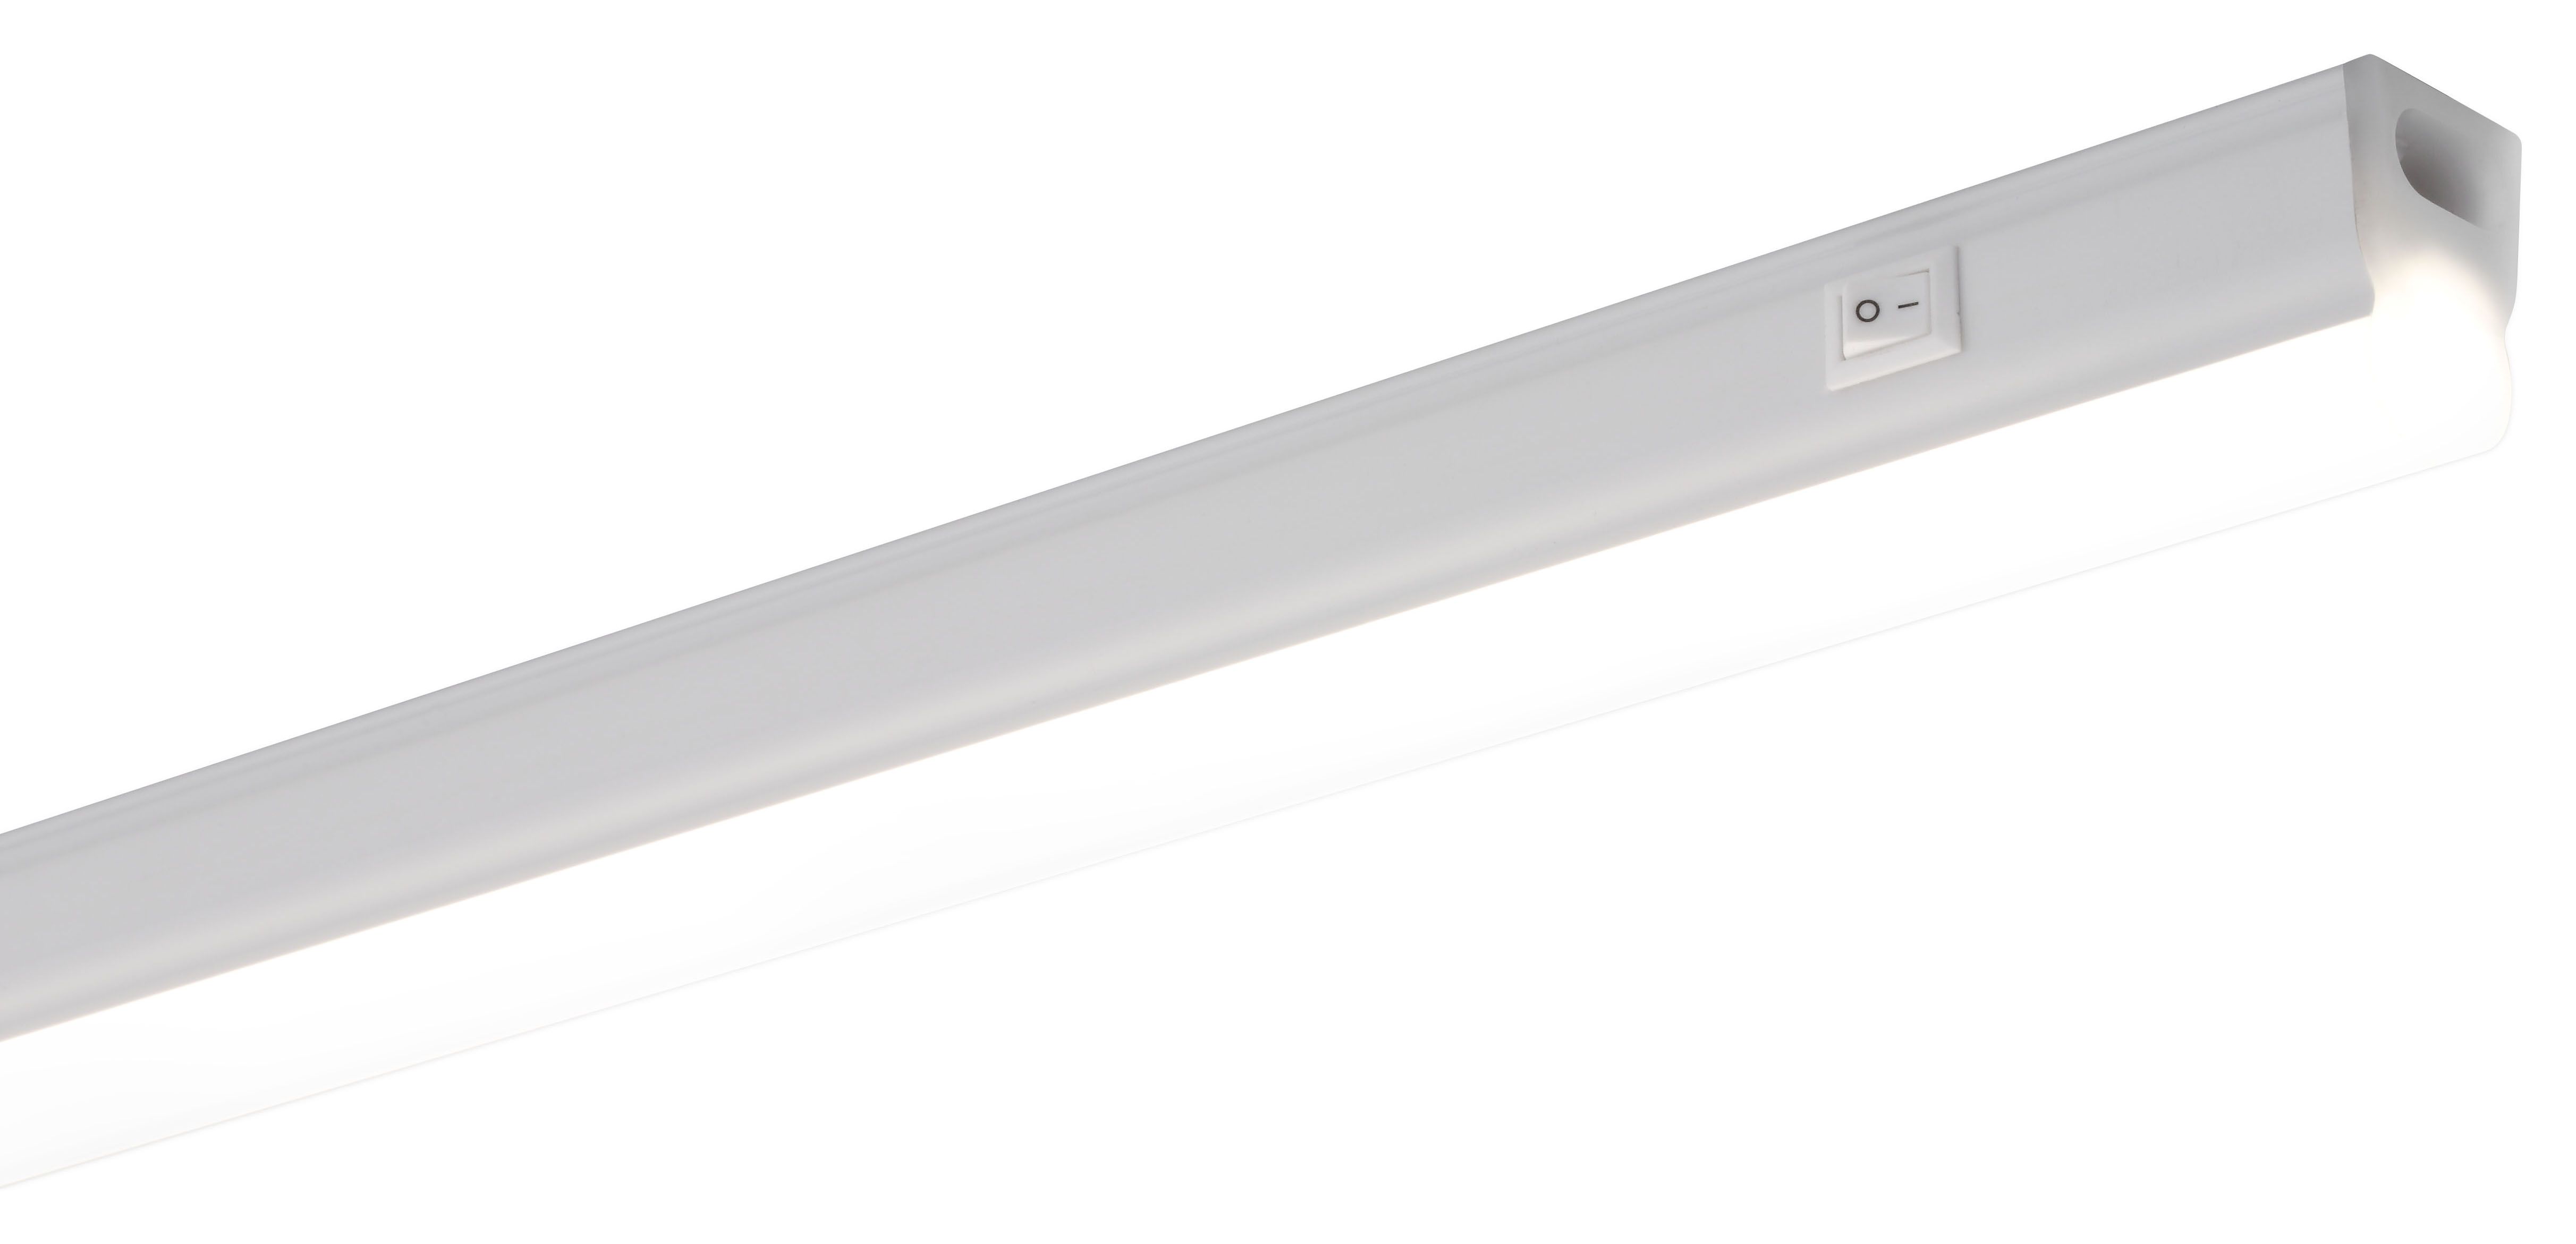 Sylvania LED Pipe L900 High Output Nw T5 Replacement Batten Light